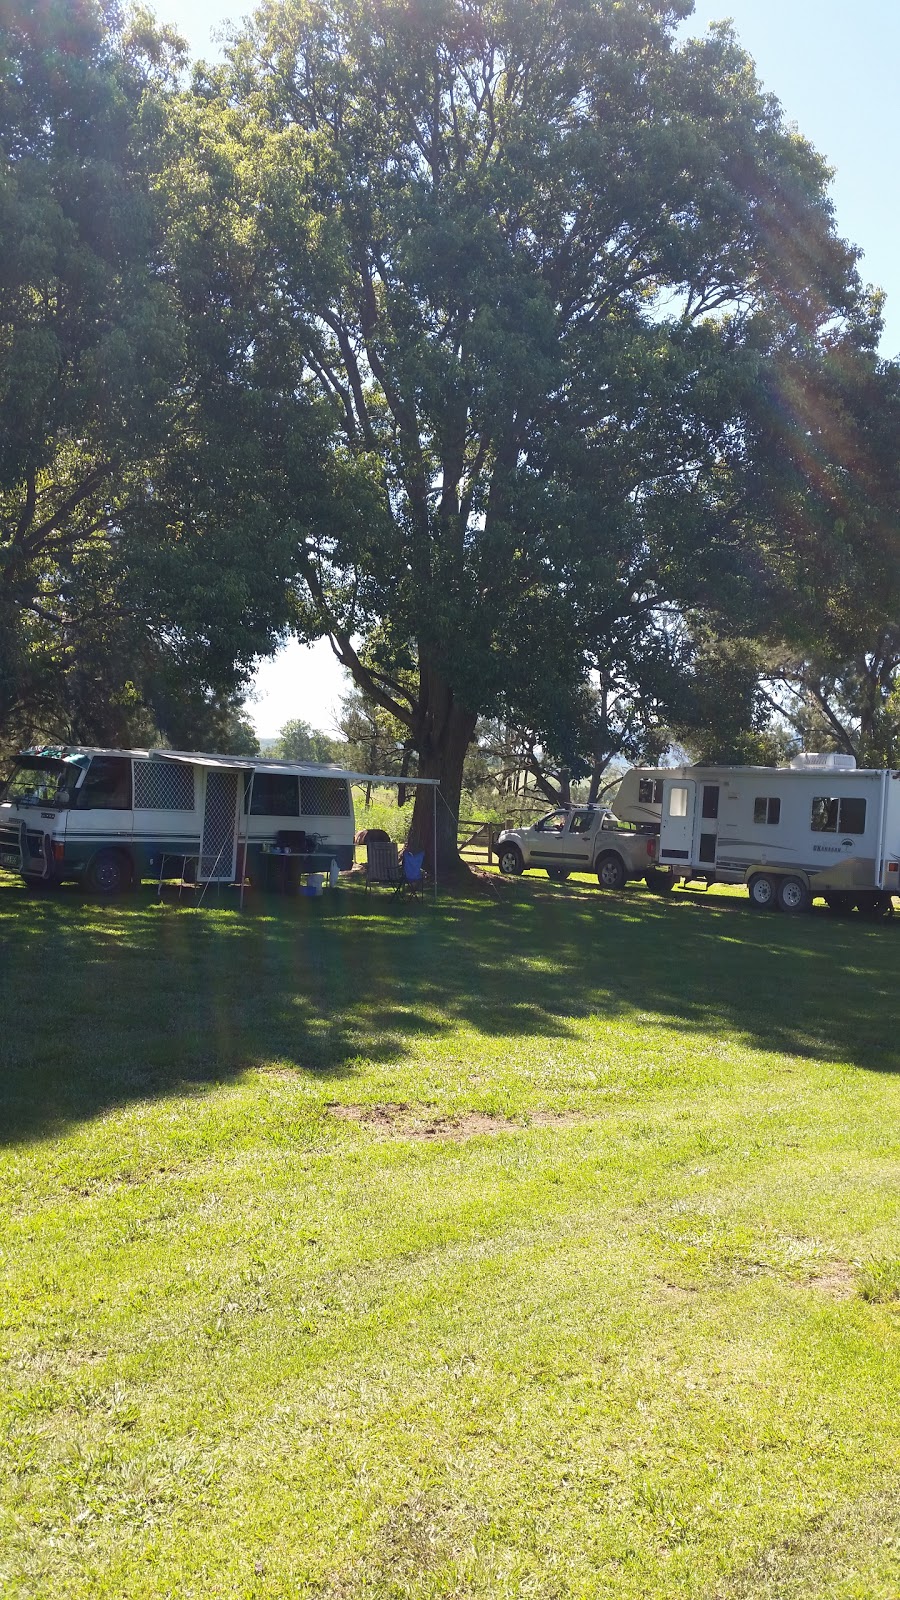 Woodenbong Campground | campground | 127 Unumgar St, Woodenbong NSW 2476, Australia | 0427612919 OR +61 427 612 919